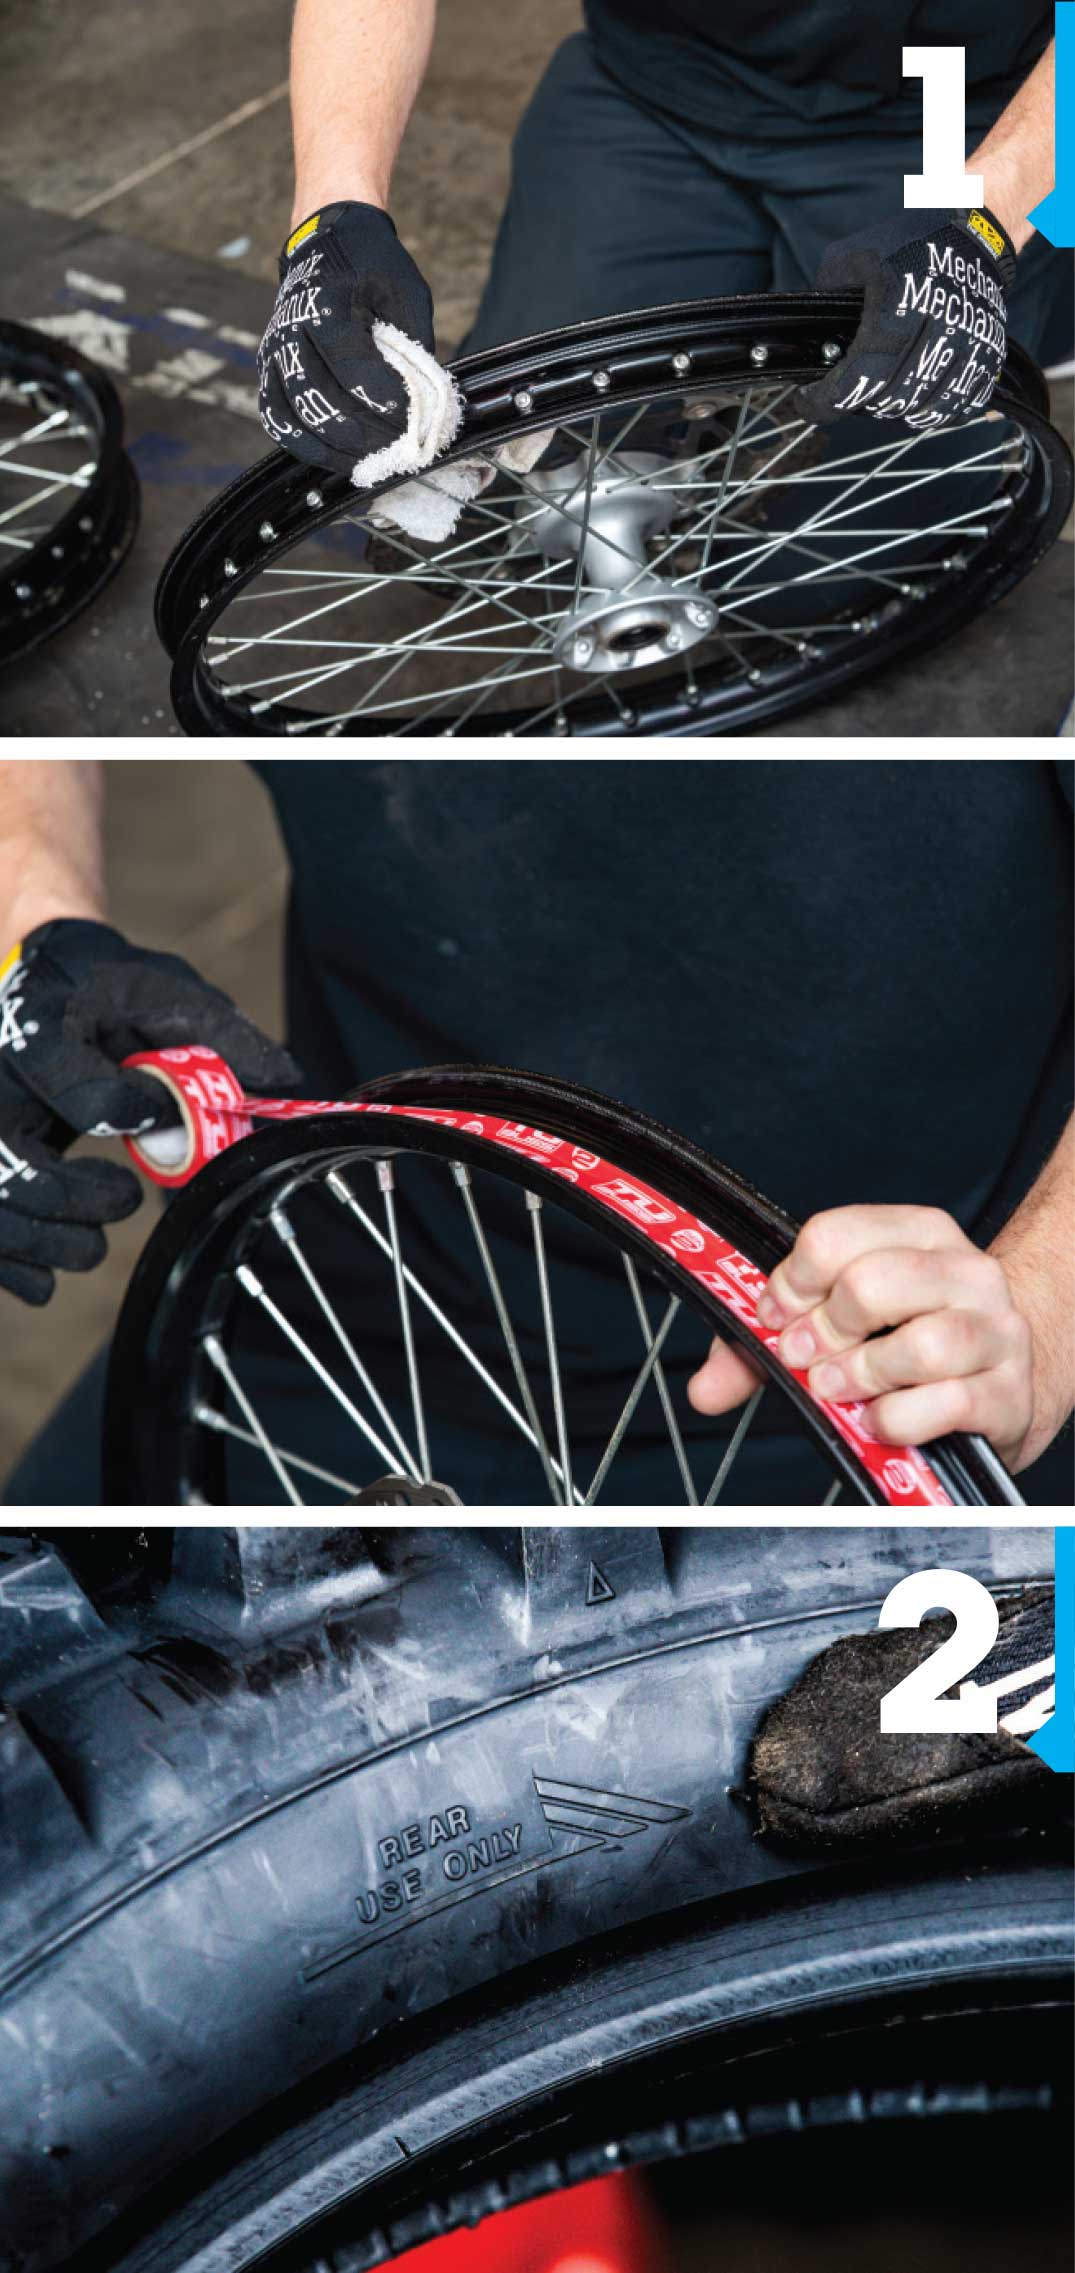 First, remove the old tubes and tires